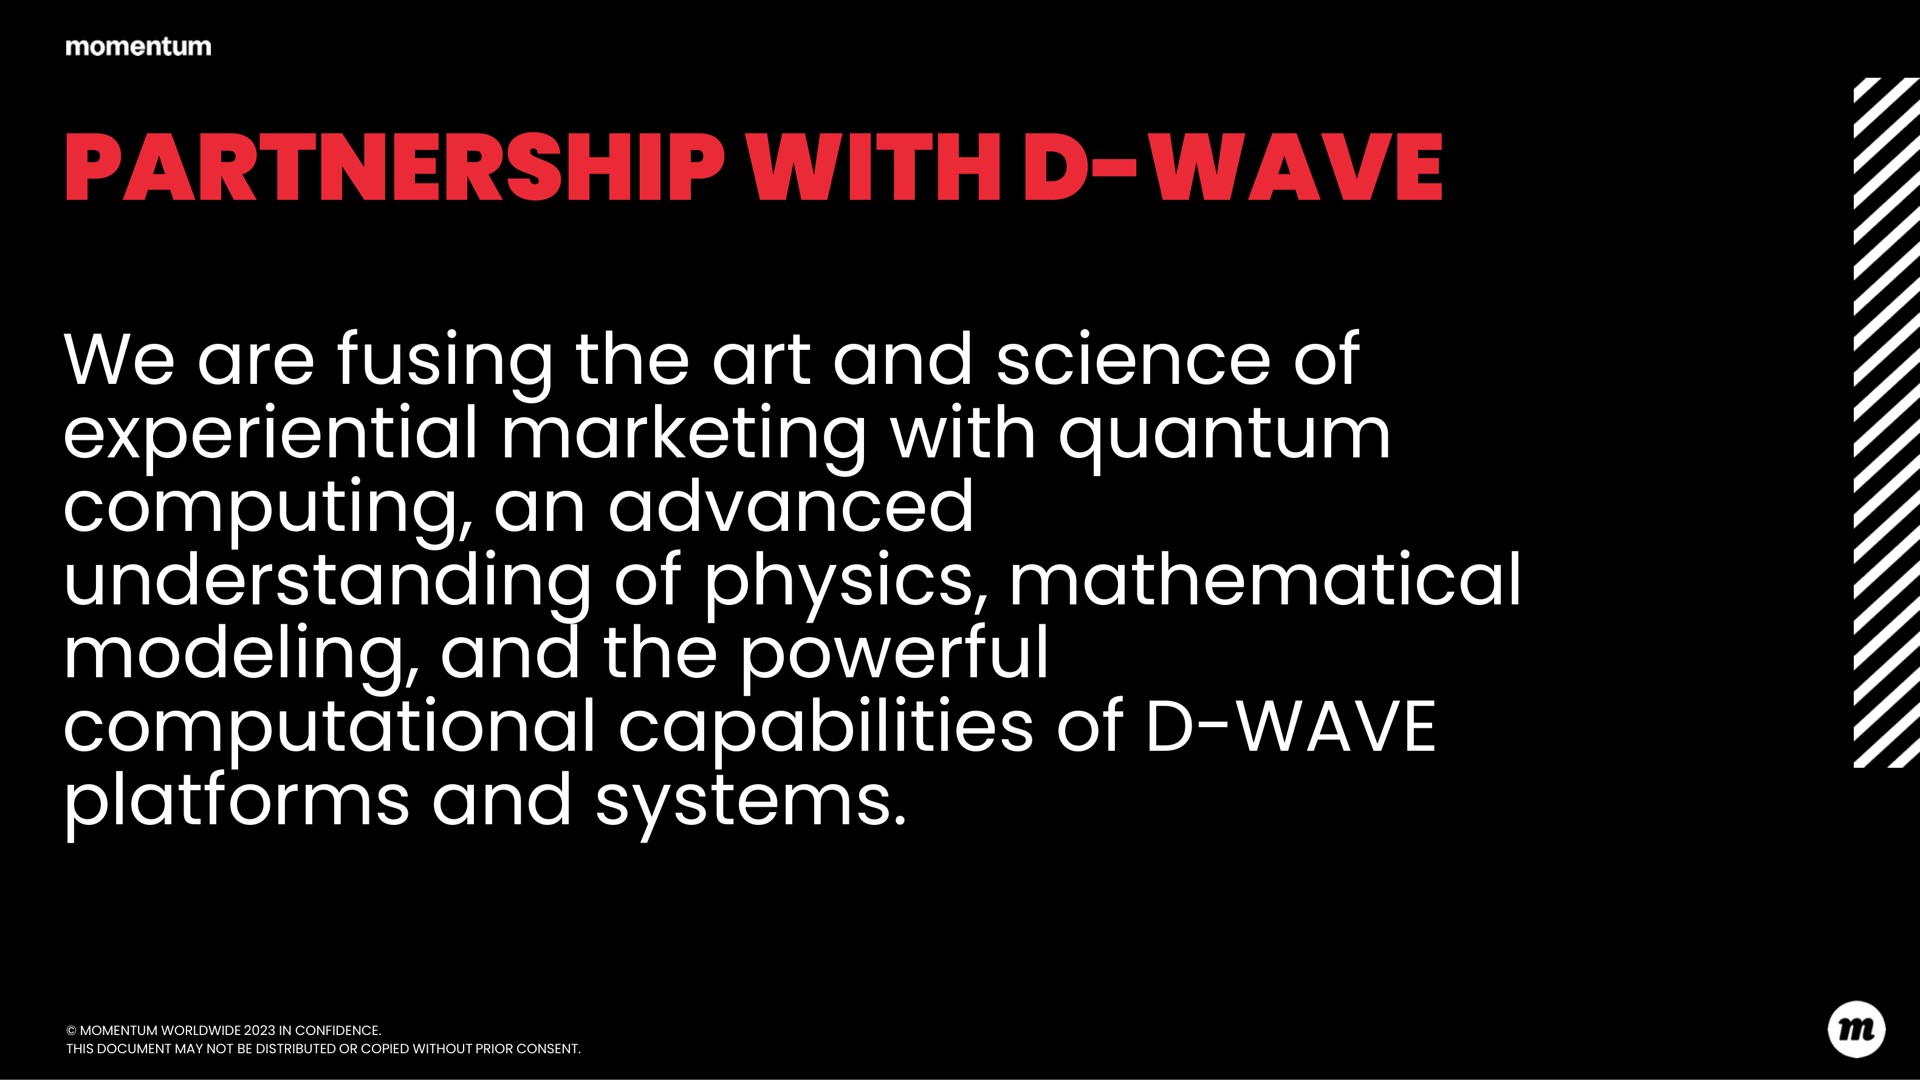 partnership with wave we are fusing the art and science of experiential marketing with quantum computing an advanced understanding of physics mathematical modeling and the powerful computational capabilities of wave platforms and systems a | D-Wave